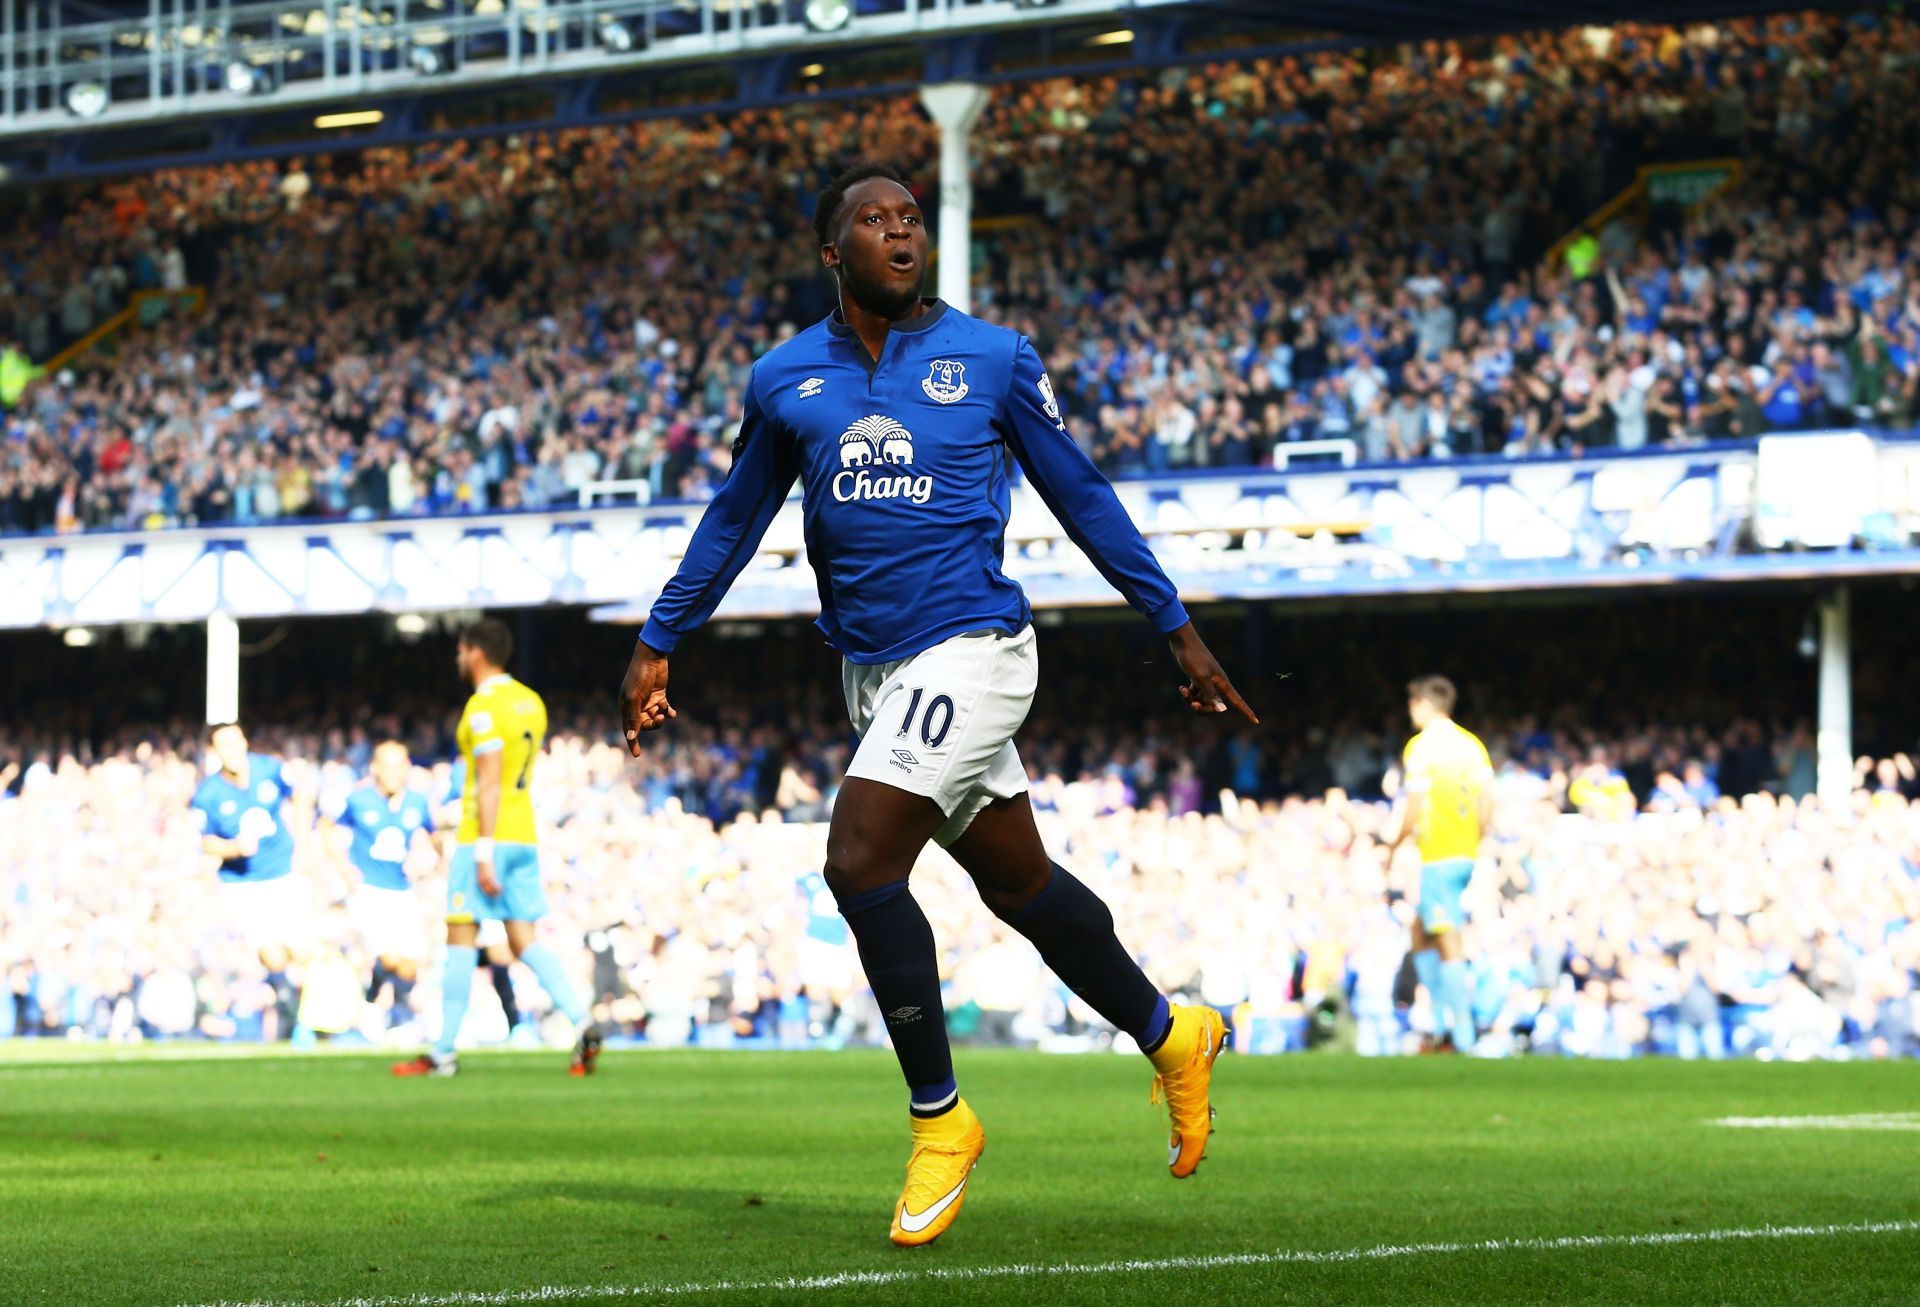 Romelu Lukaku was unlucky not to get a fair chance at Chelsea in his early days